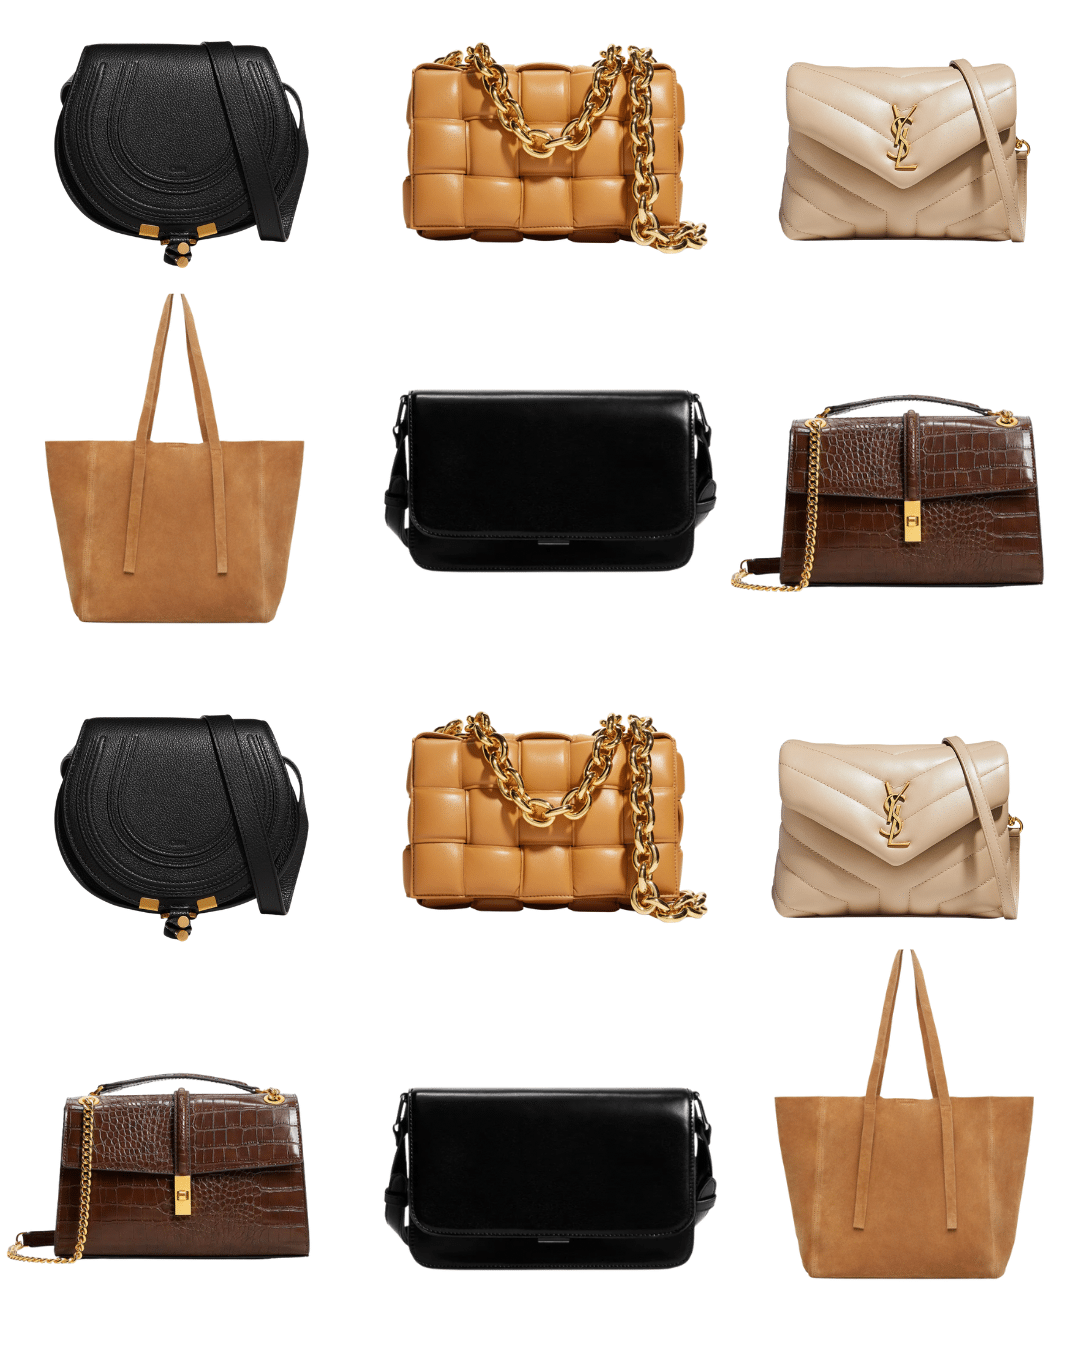 Fall+2022+Handbags%3A+Where+to+Shop+Fall+Must-Have+Goodies